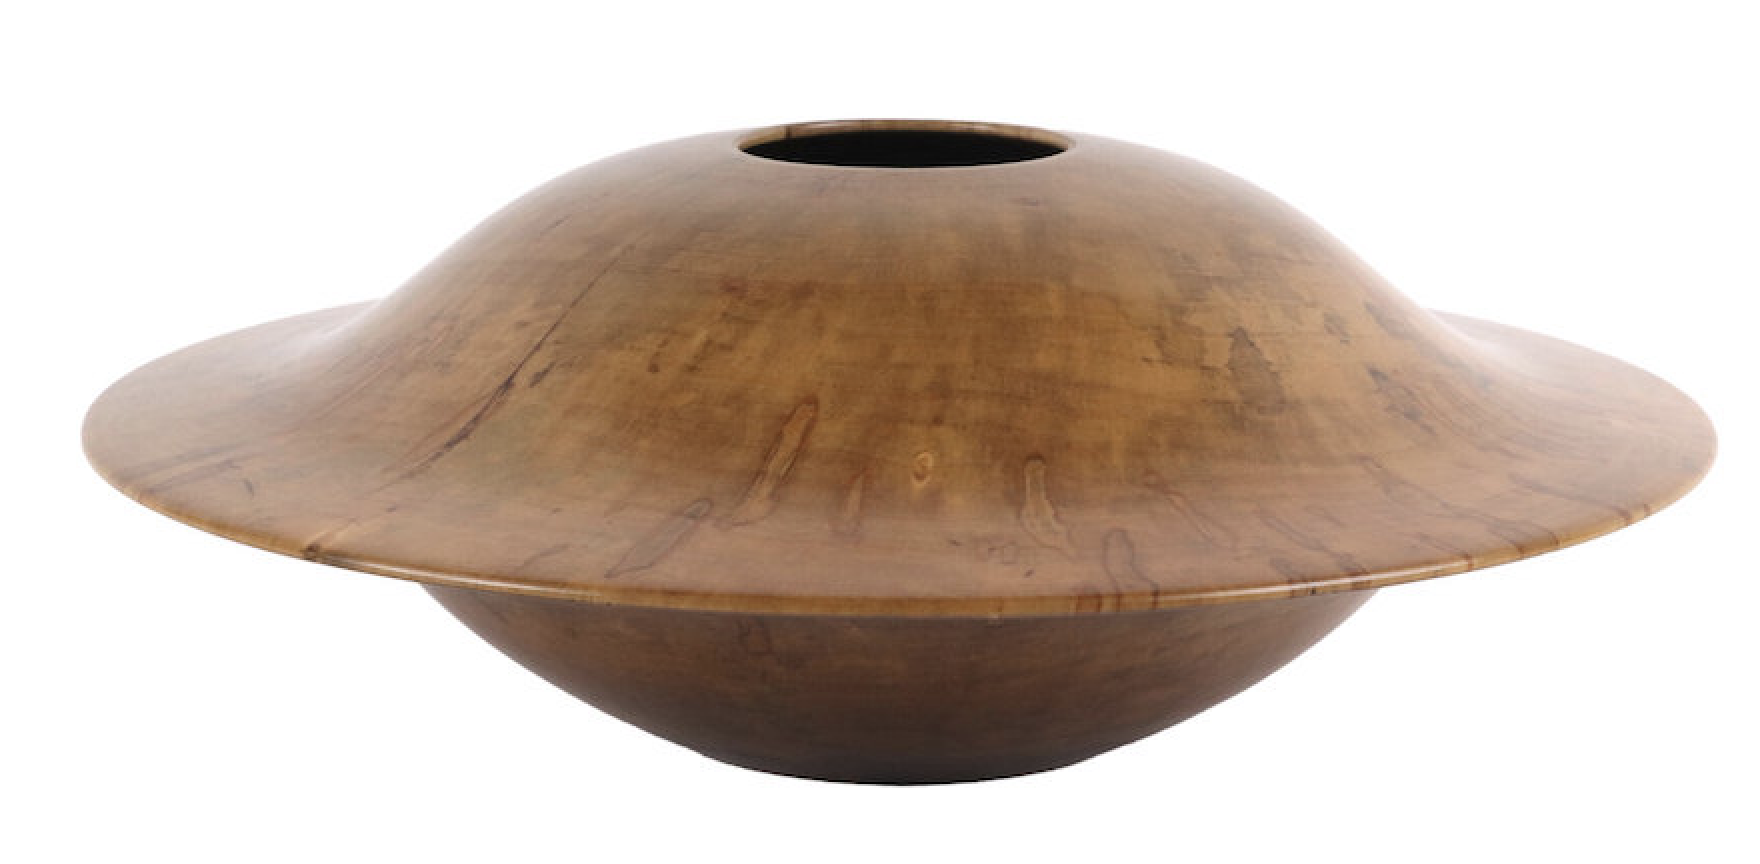 Philip Moulthrop red leopard maple bowl, estimated at $2,000-$4,000